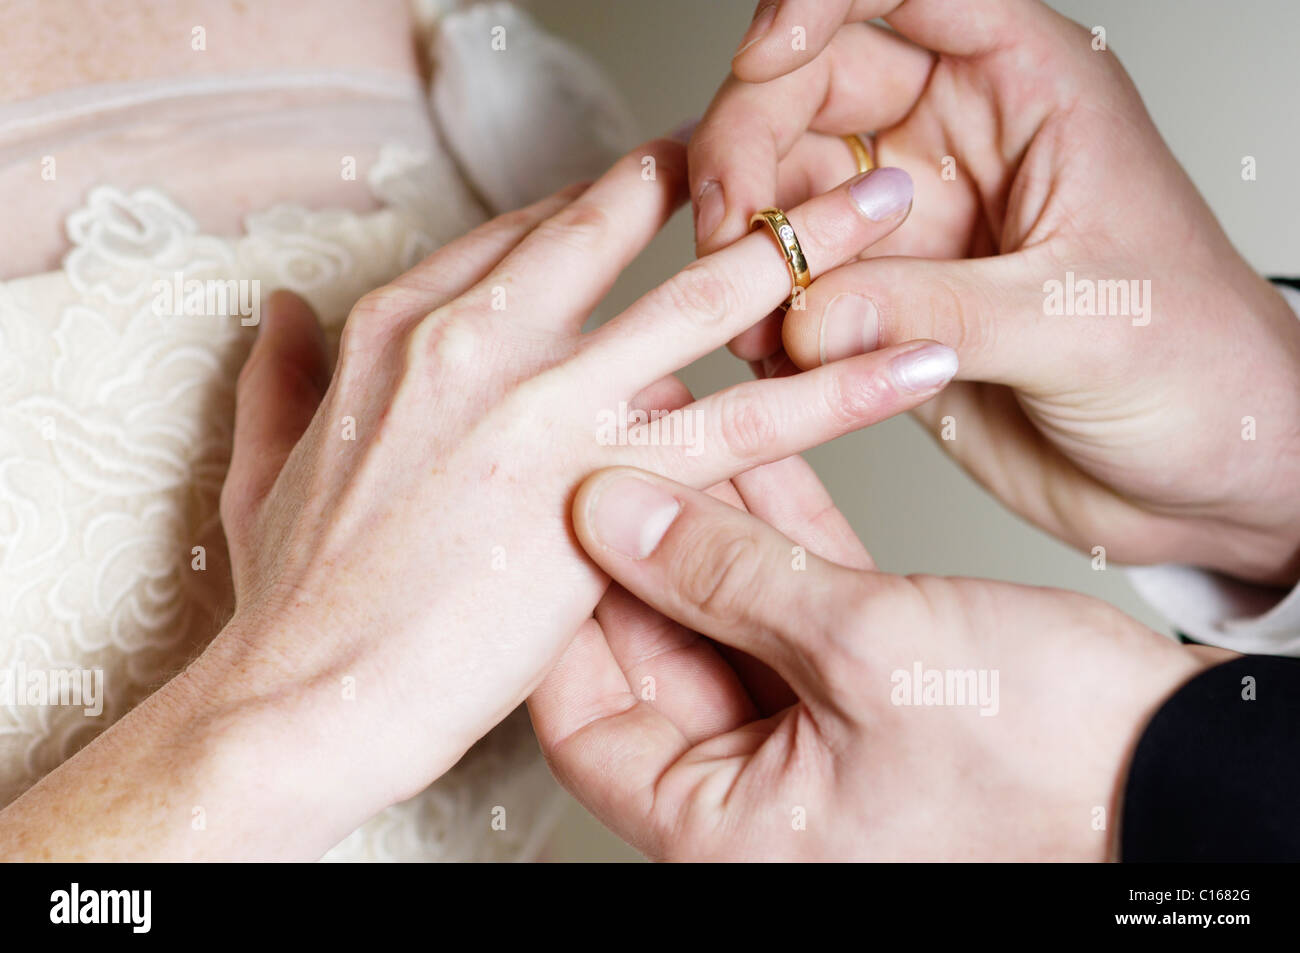 Groom placing the wedding ring on the bride's finger Stock Photo